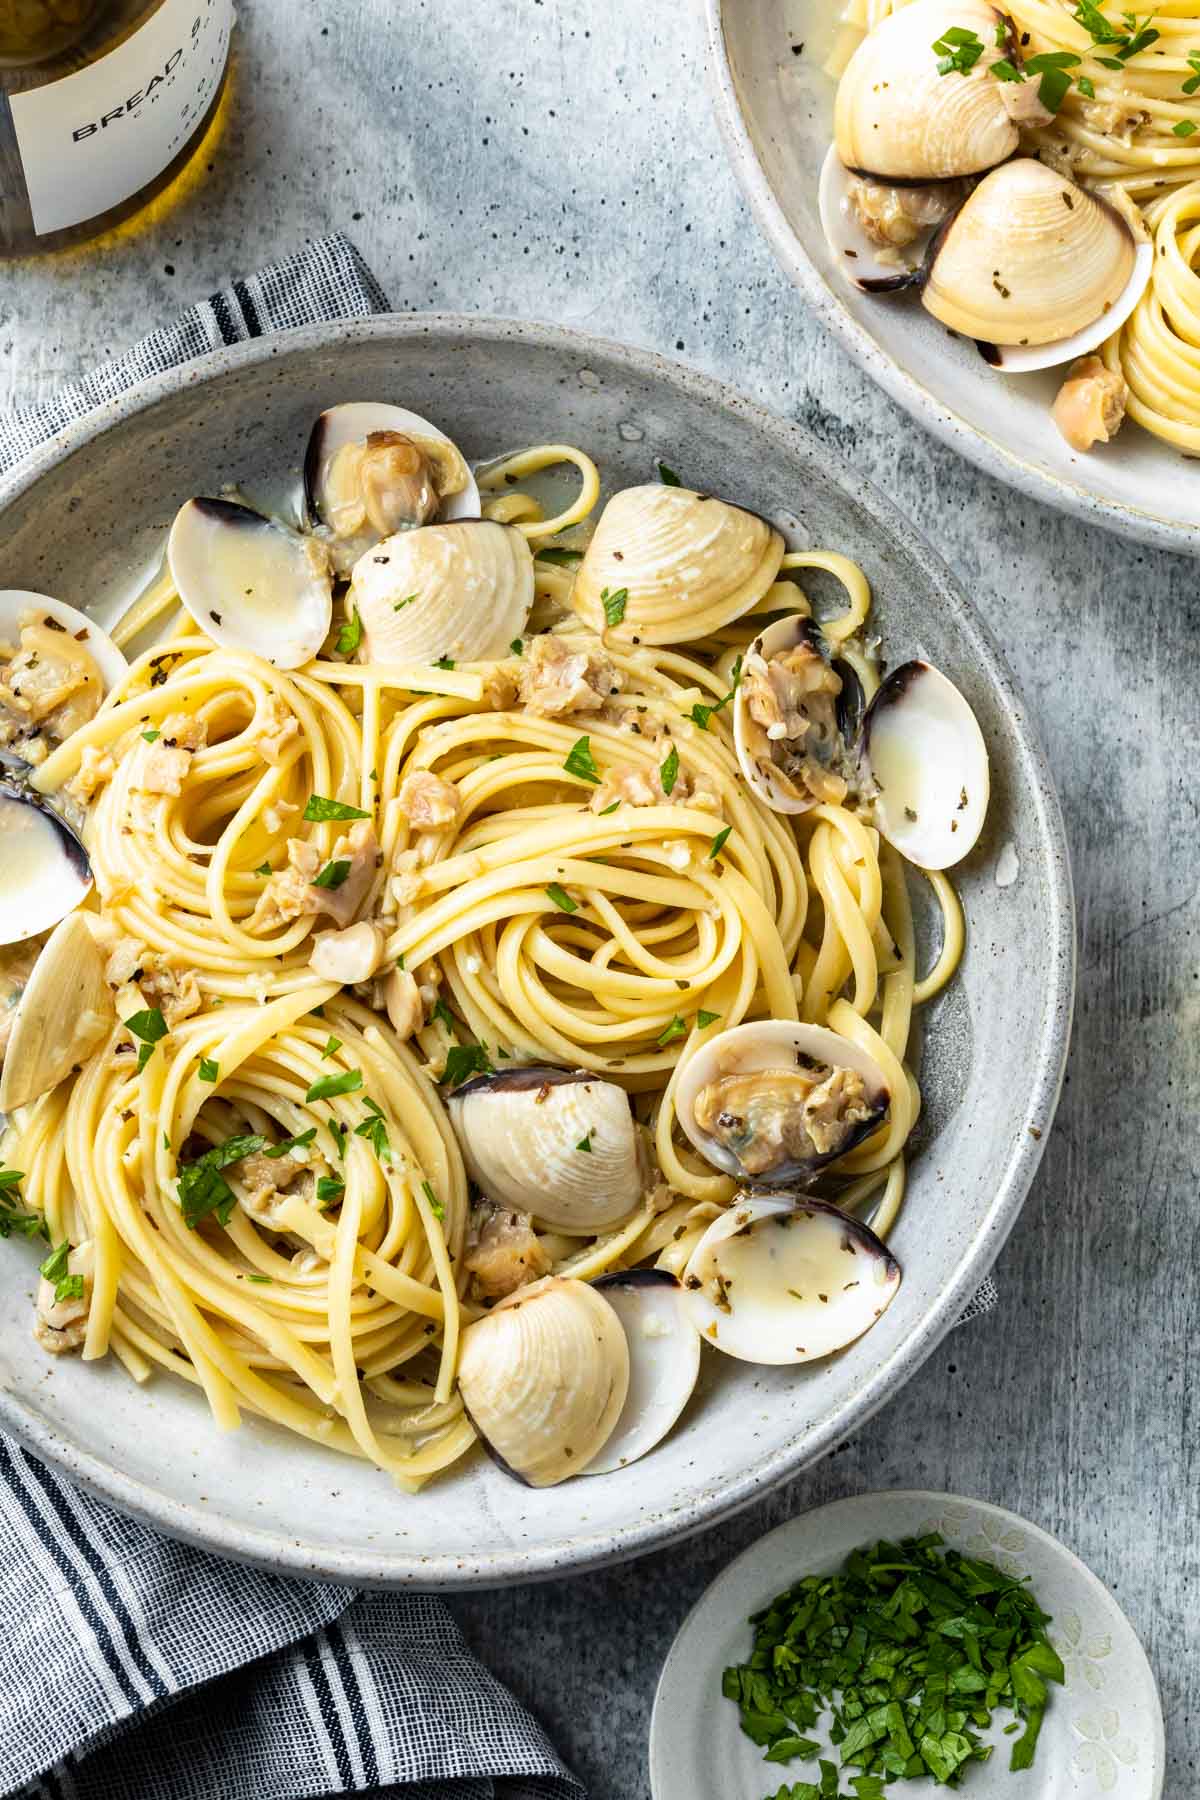 Clams, in the shell and chopped, and linguine in a bowl, garnished with chopped parsley